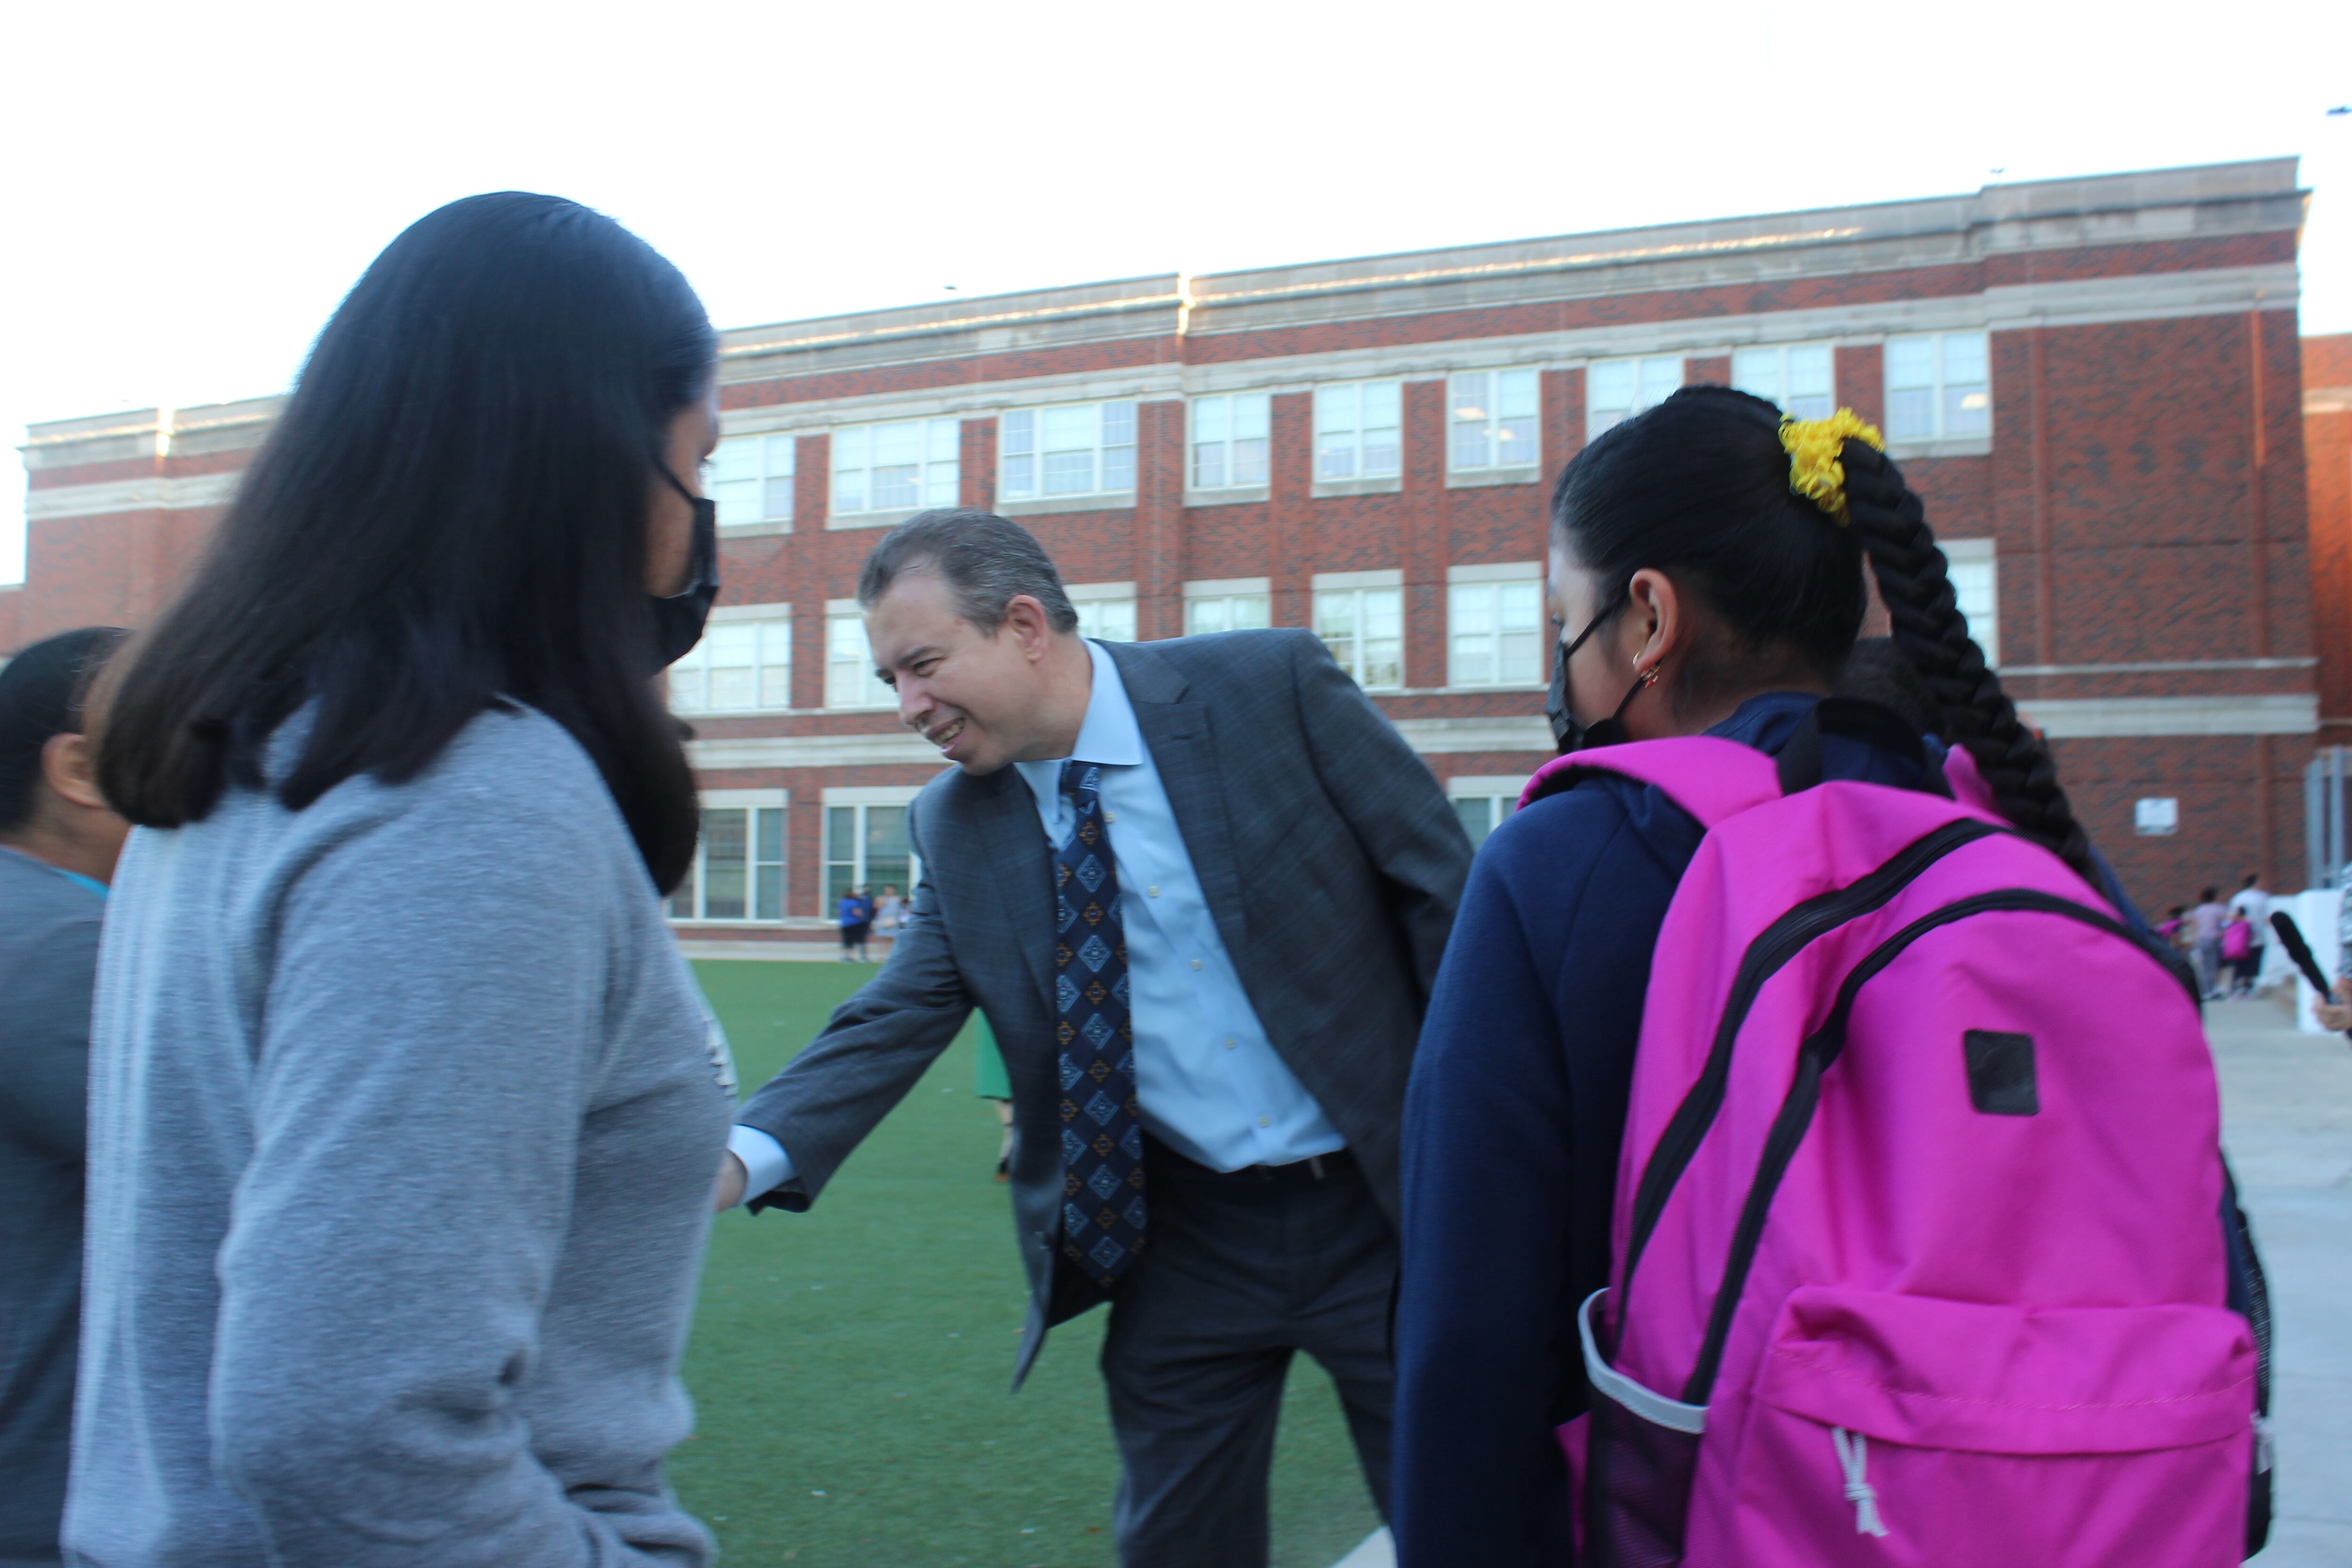 A man shakes hands with students wearing backpacks in front of a school building.